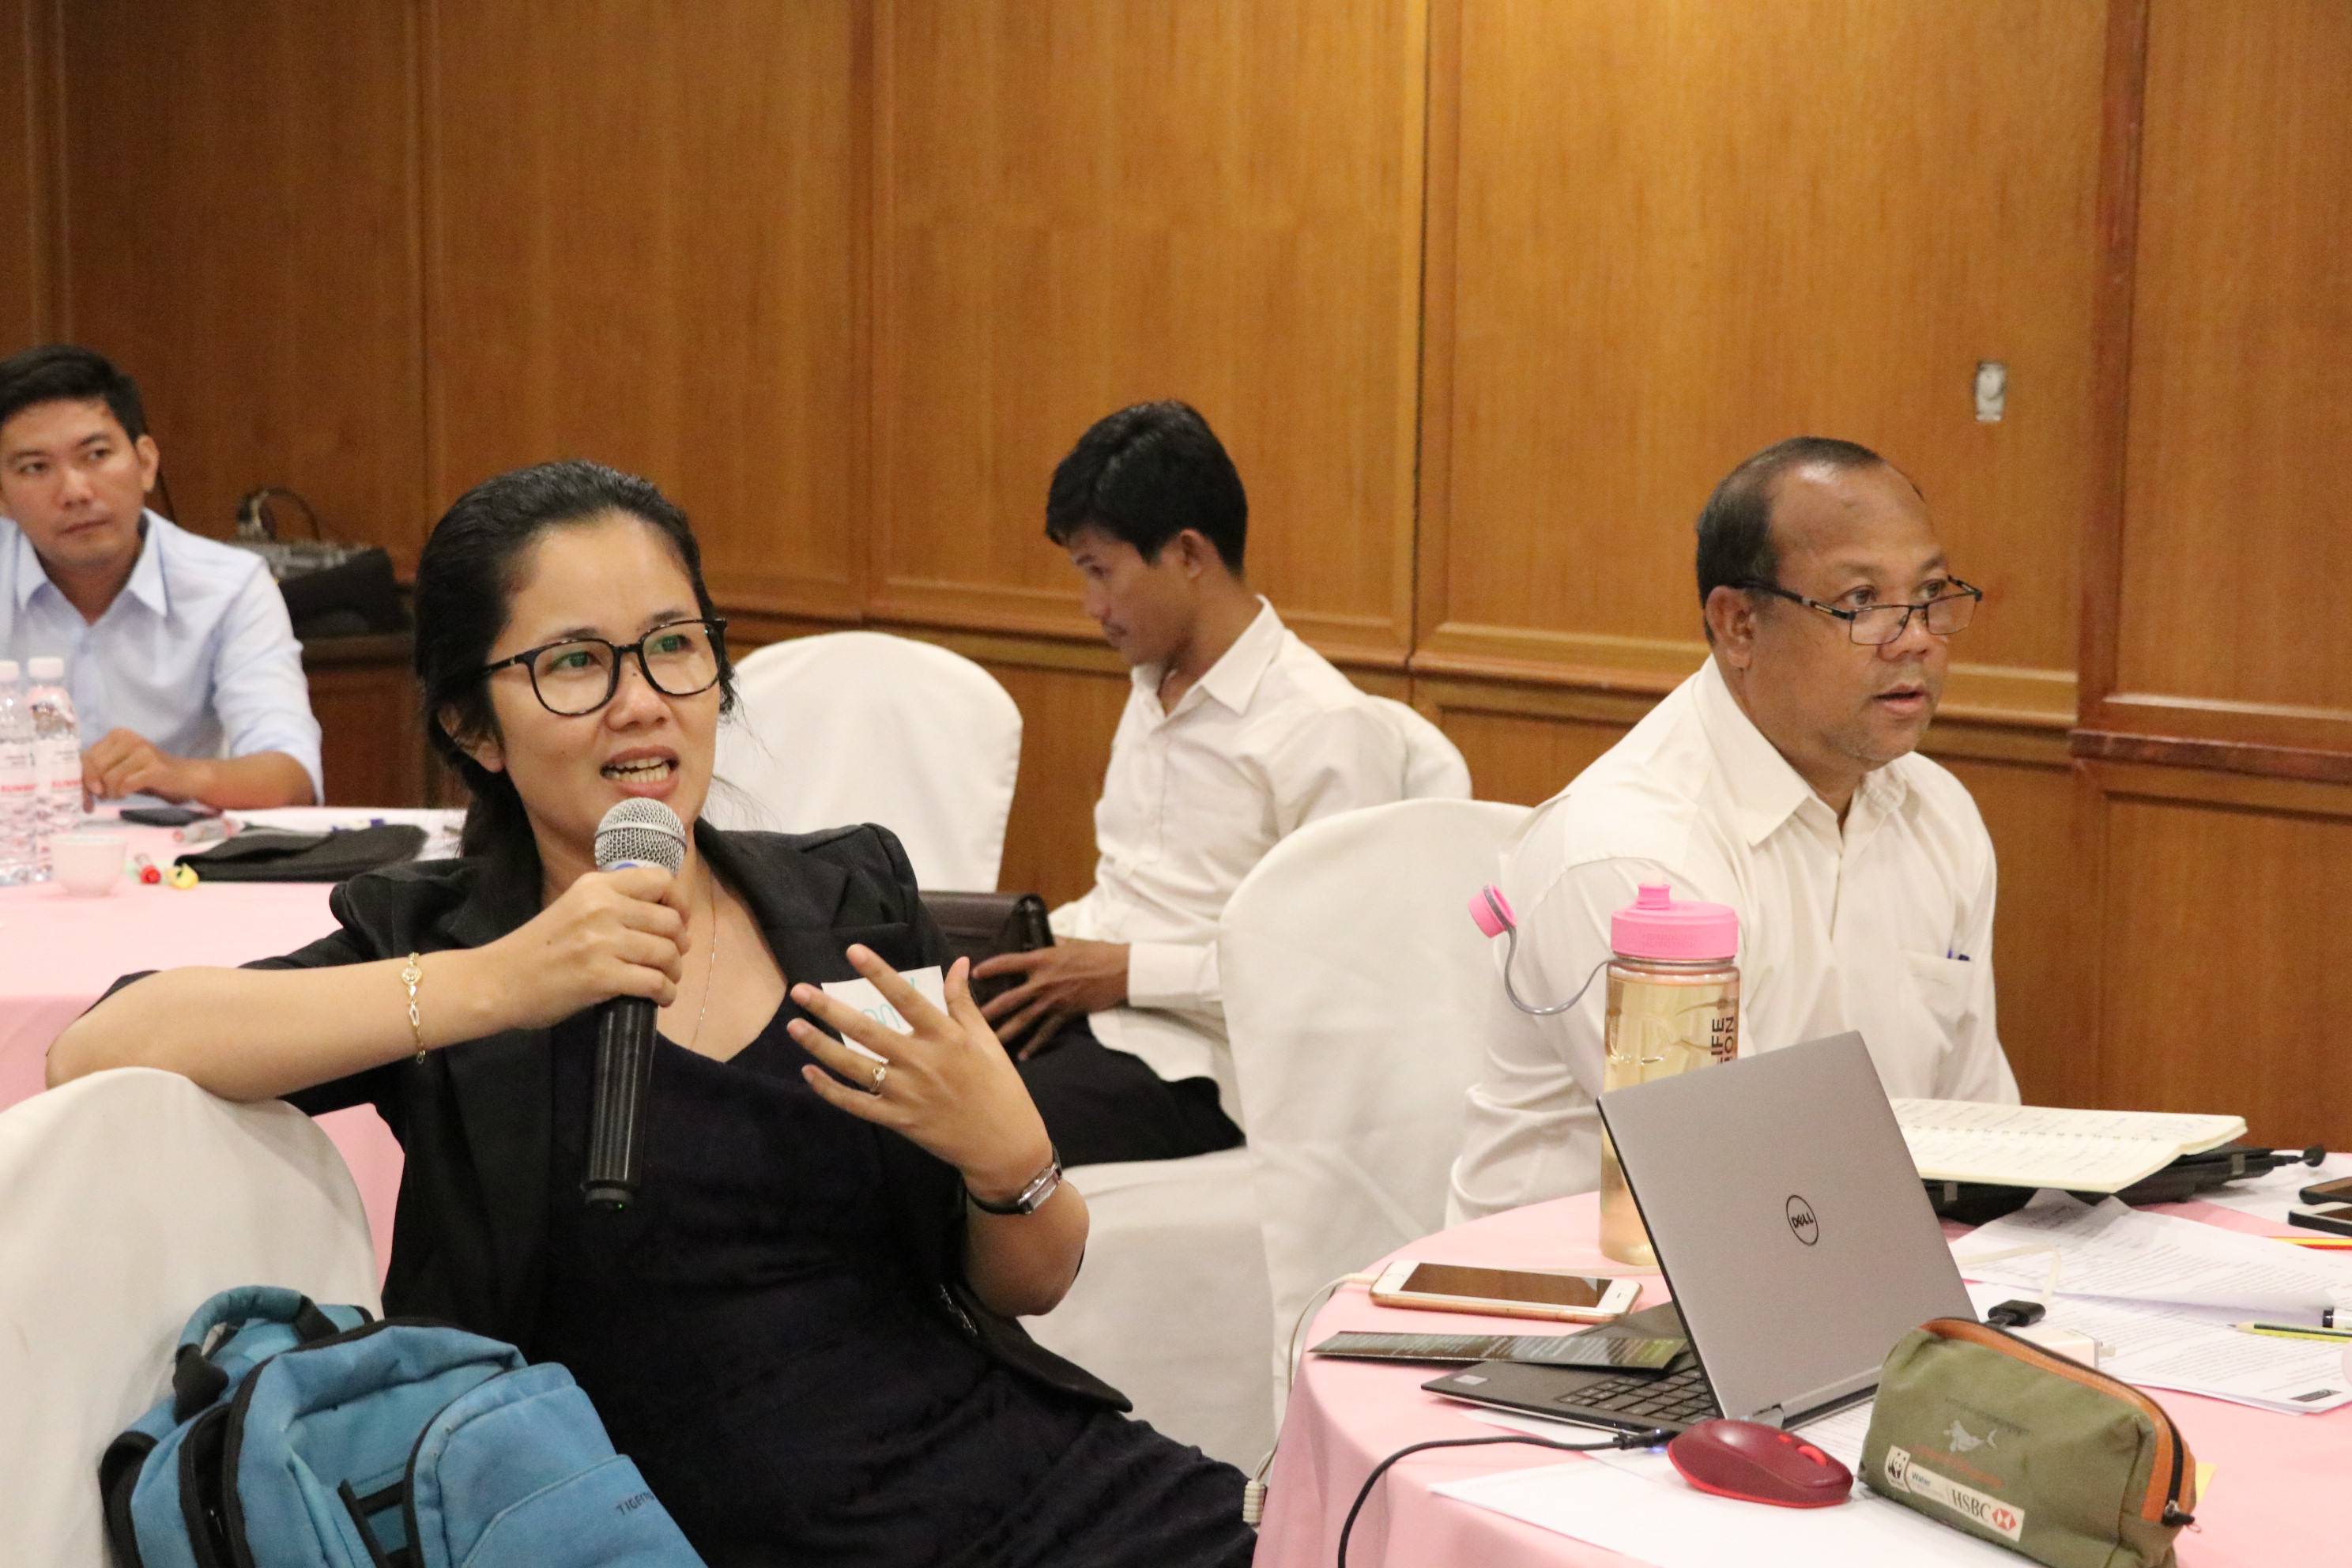 Stakeholder workshop on using open data and digital tool for better project implementation